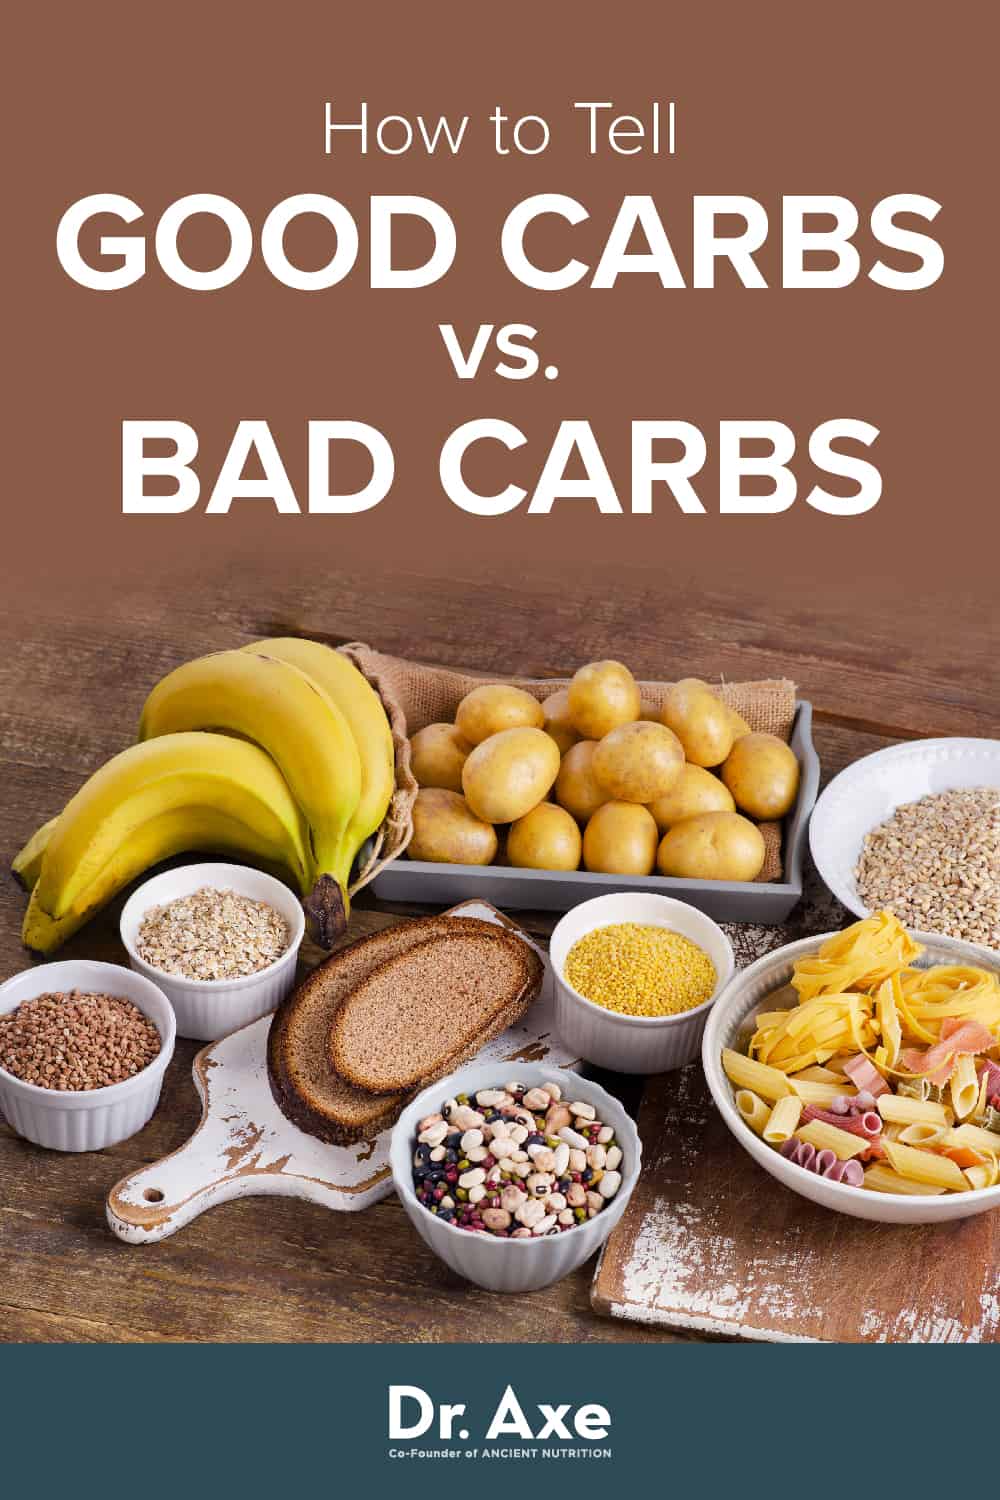 Good Carbs vs. Bad Carbs: What You Need to Know - Dr. Axe